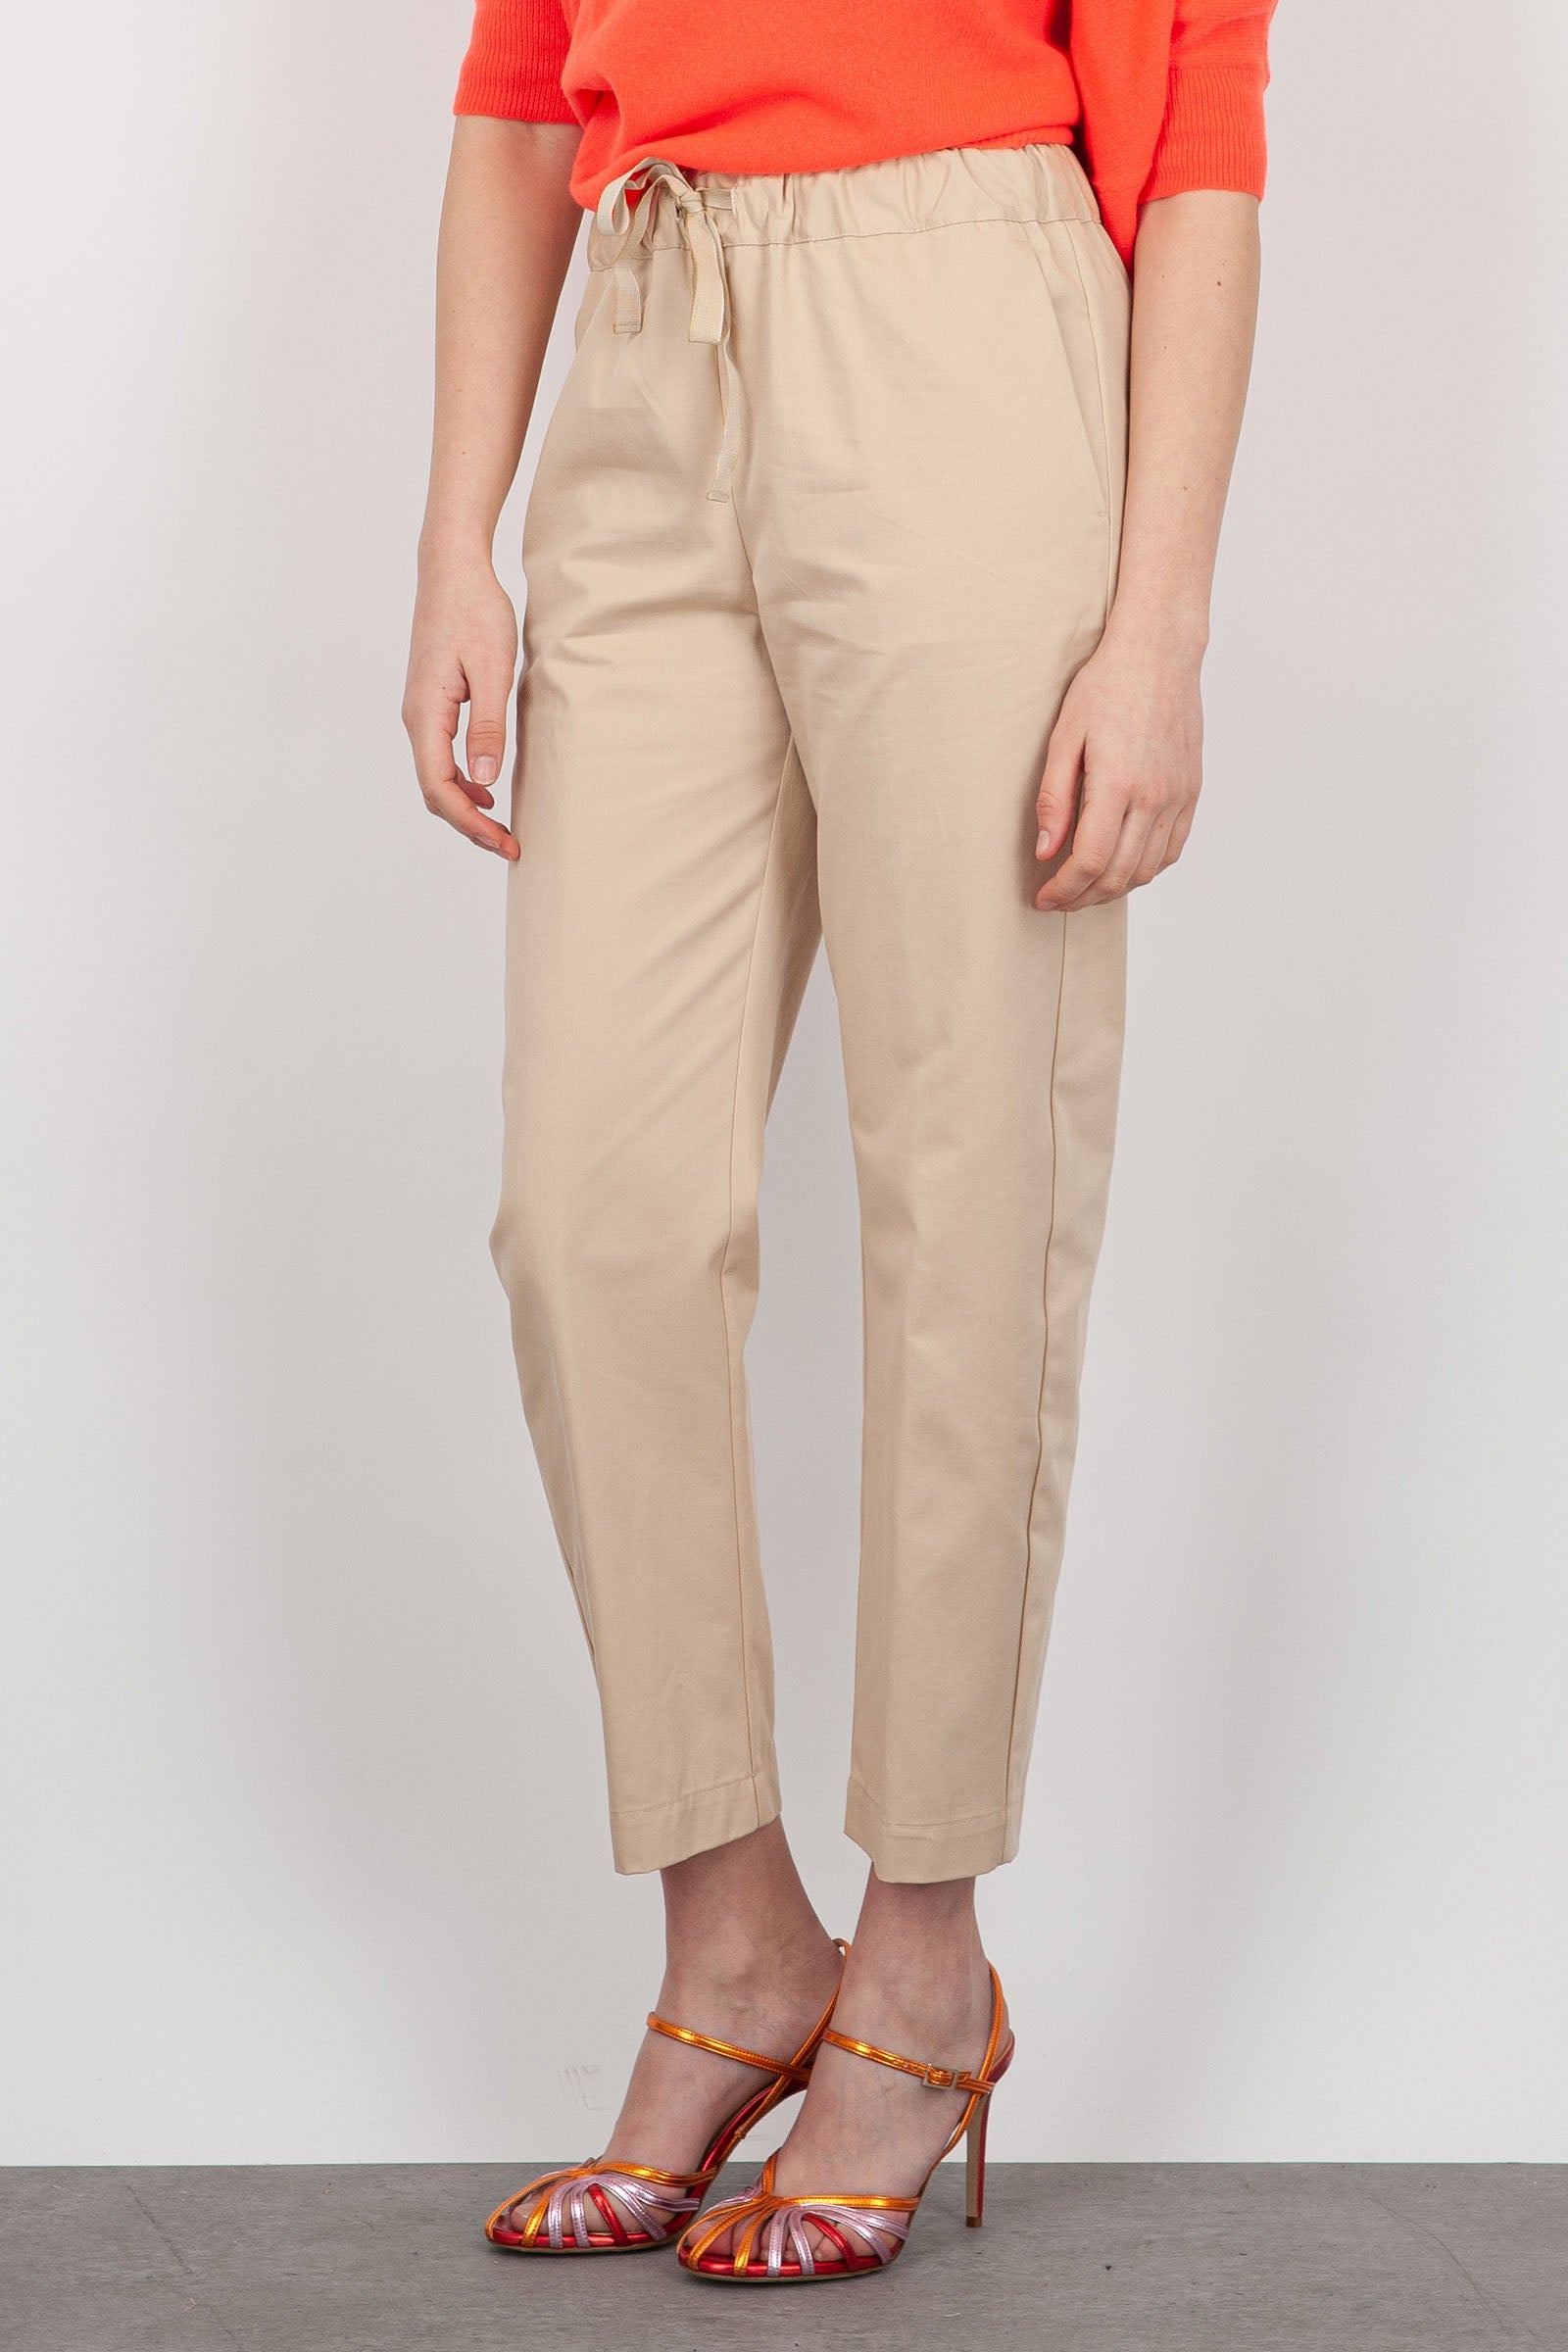 Semicouture Buddy Trousers Camel Cotton - 1